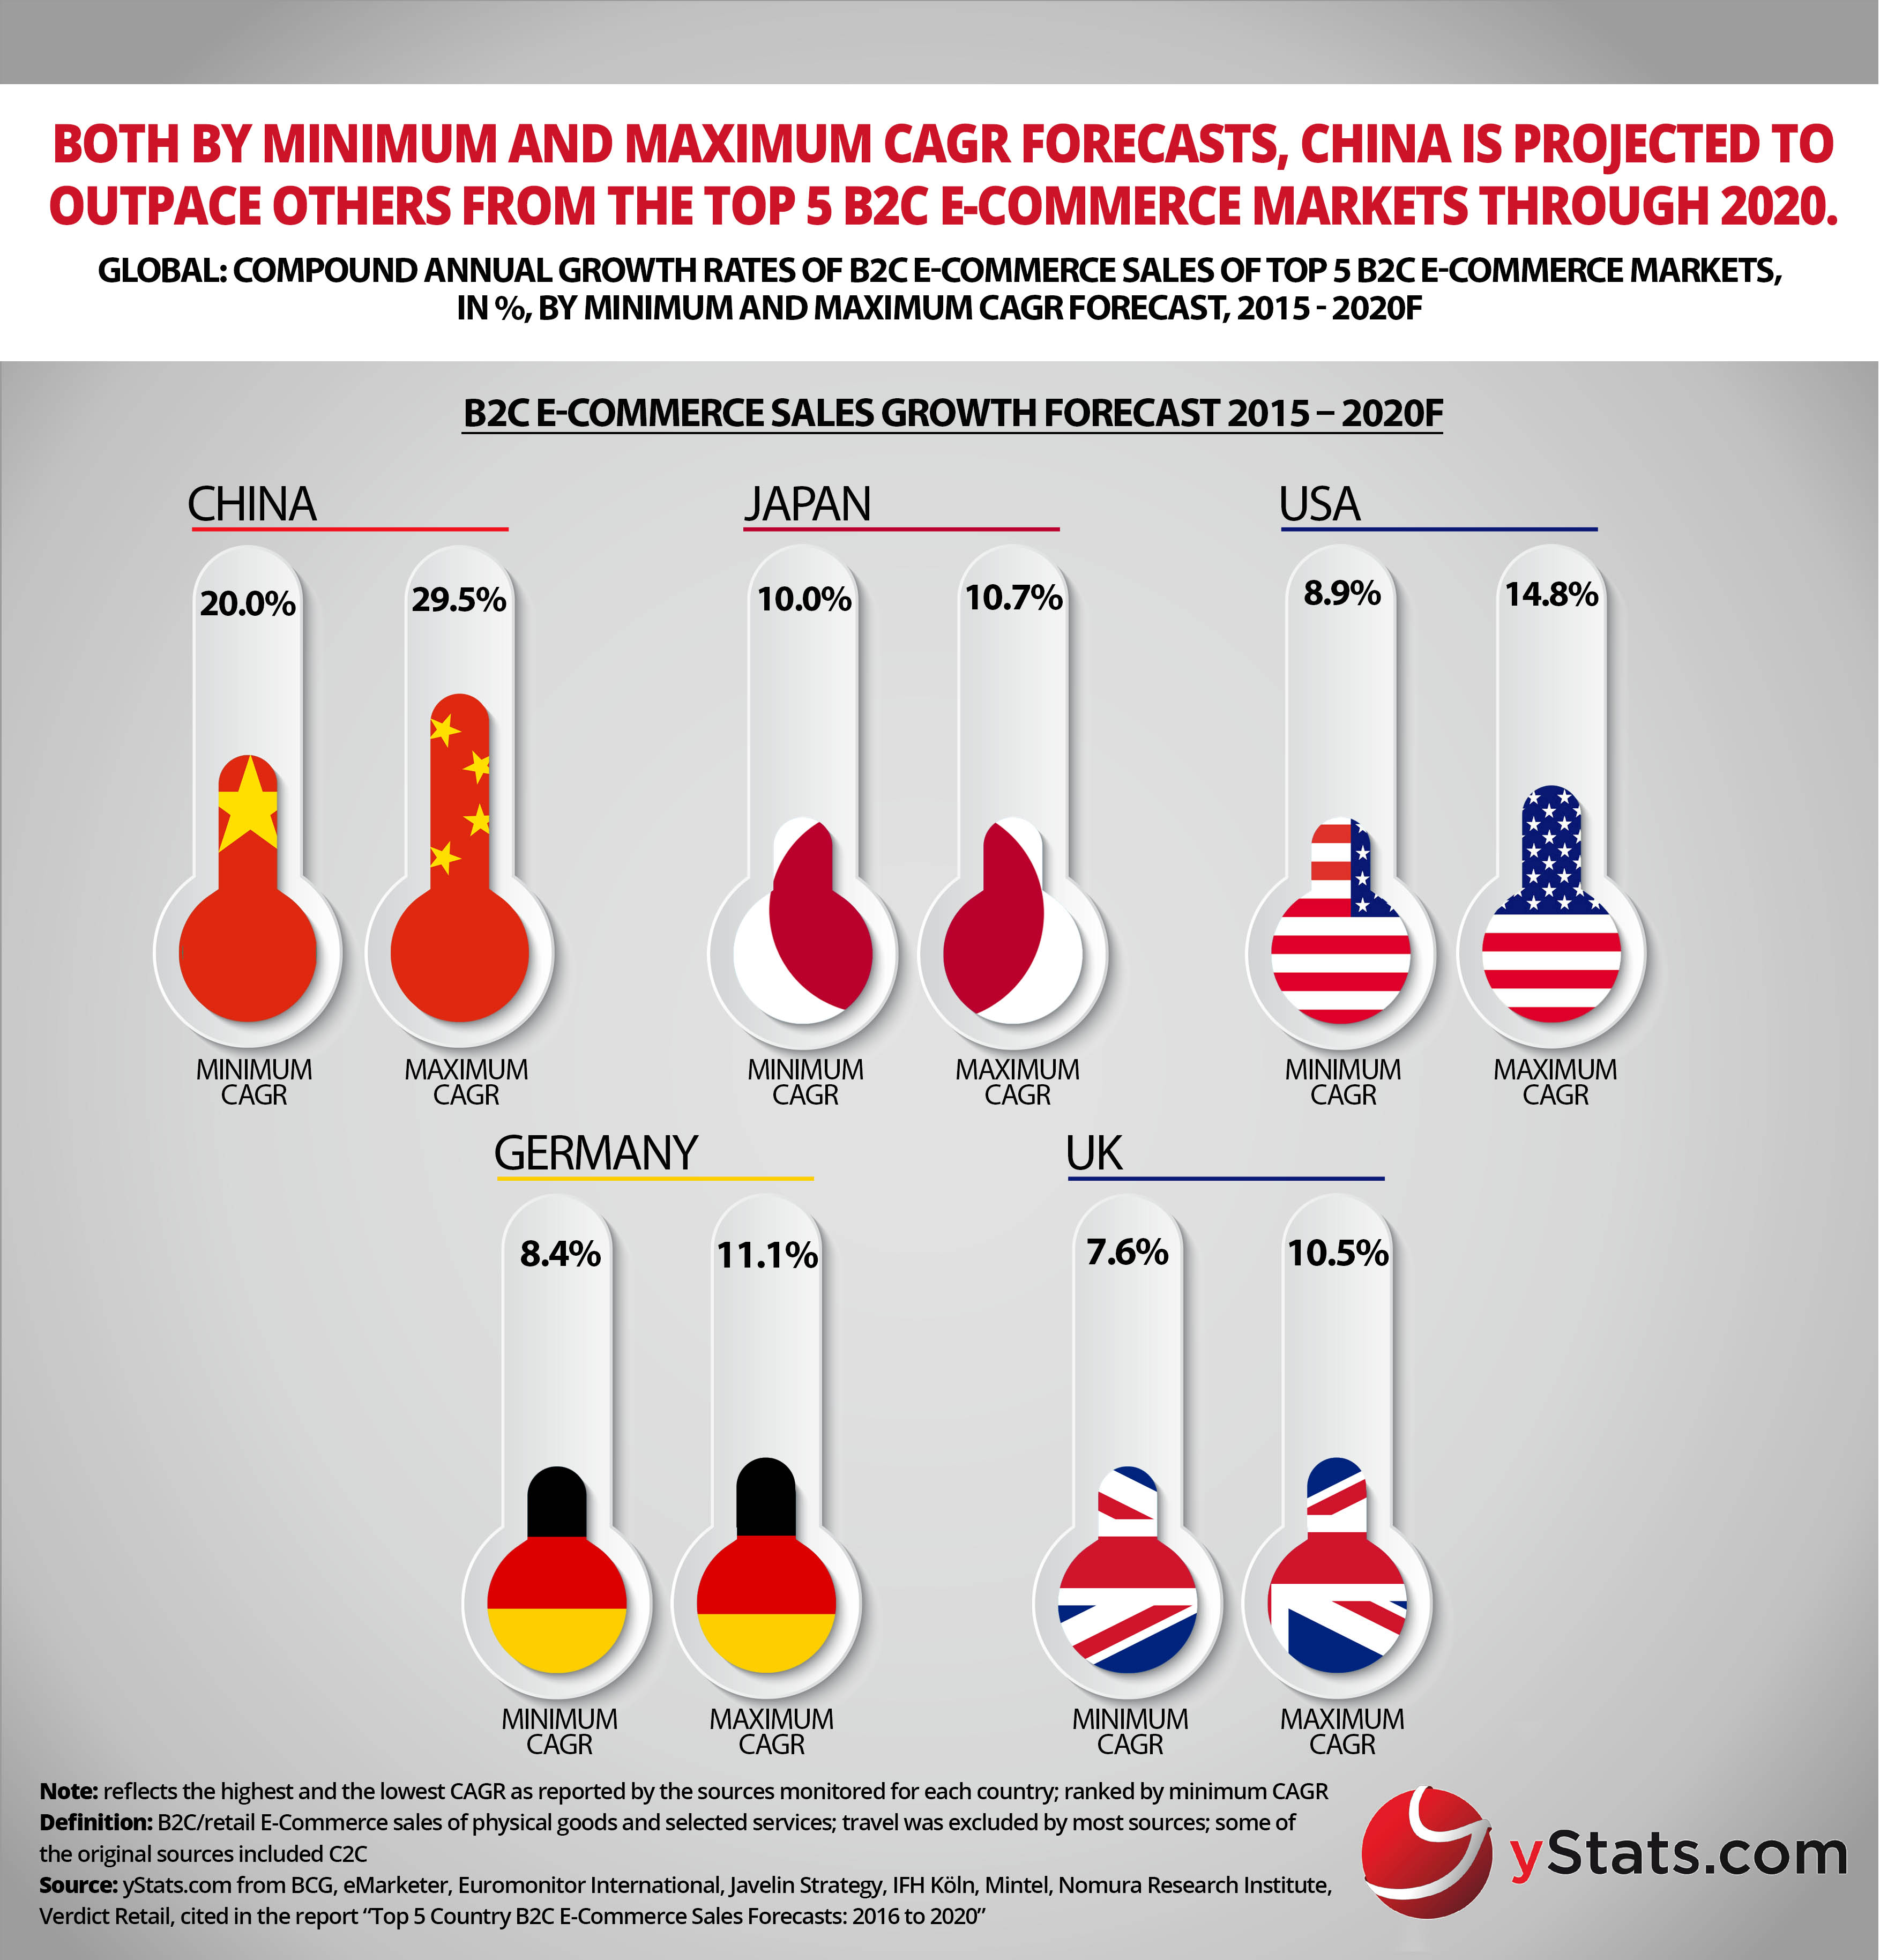 Top Country B2C E-Commerce Sales Forecasts